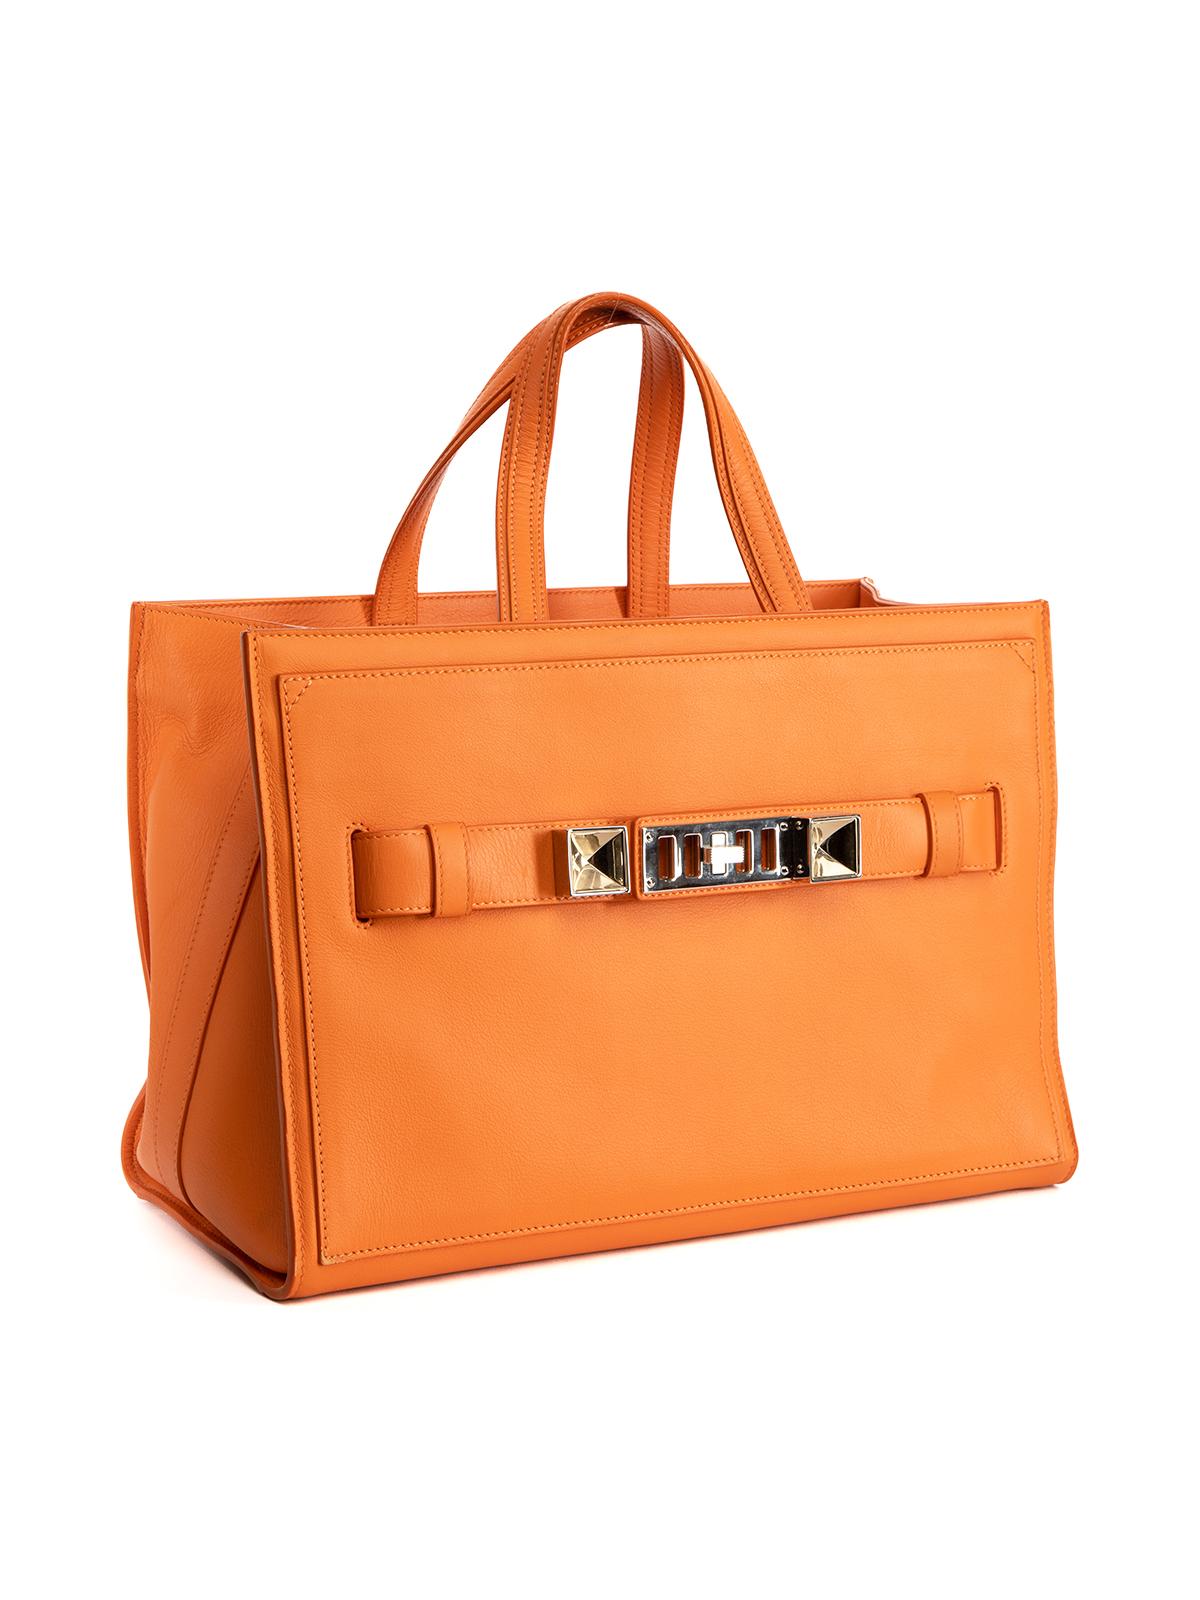 CONDITION is Very good. Minimal wear to bag is evident. Minimal wear to leather exterior and interior on this used Proenza Schouler designer resale item. Details Orange Leather Gold tone hardware Zip closure One main compartment Internal brand name